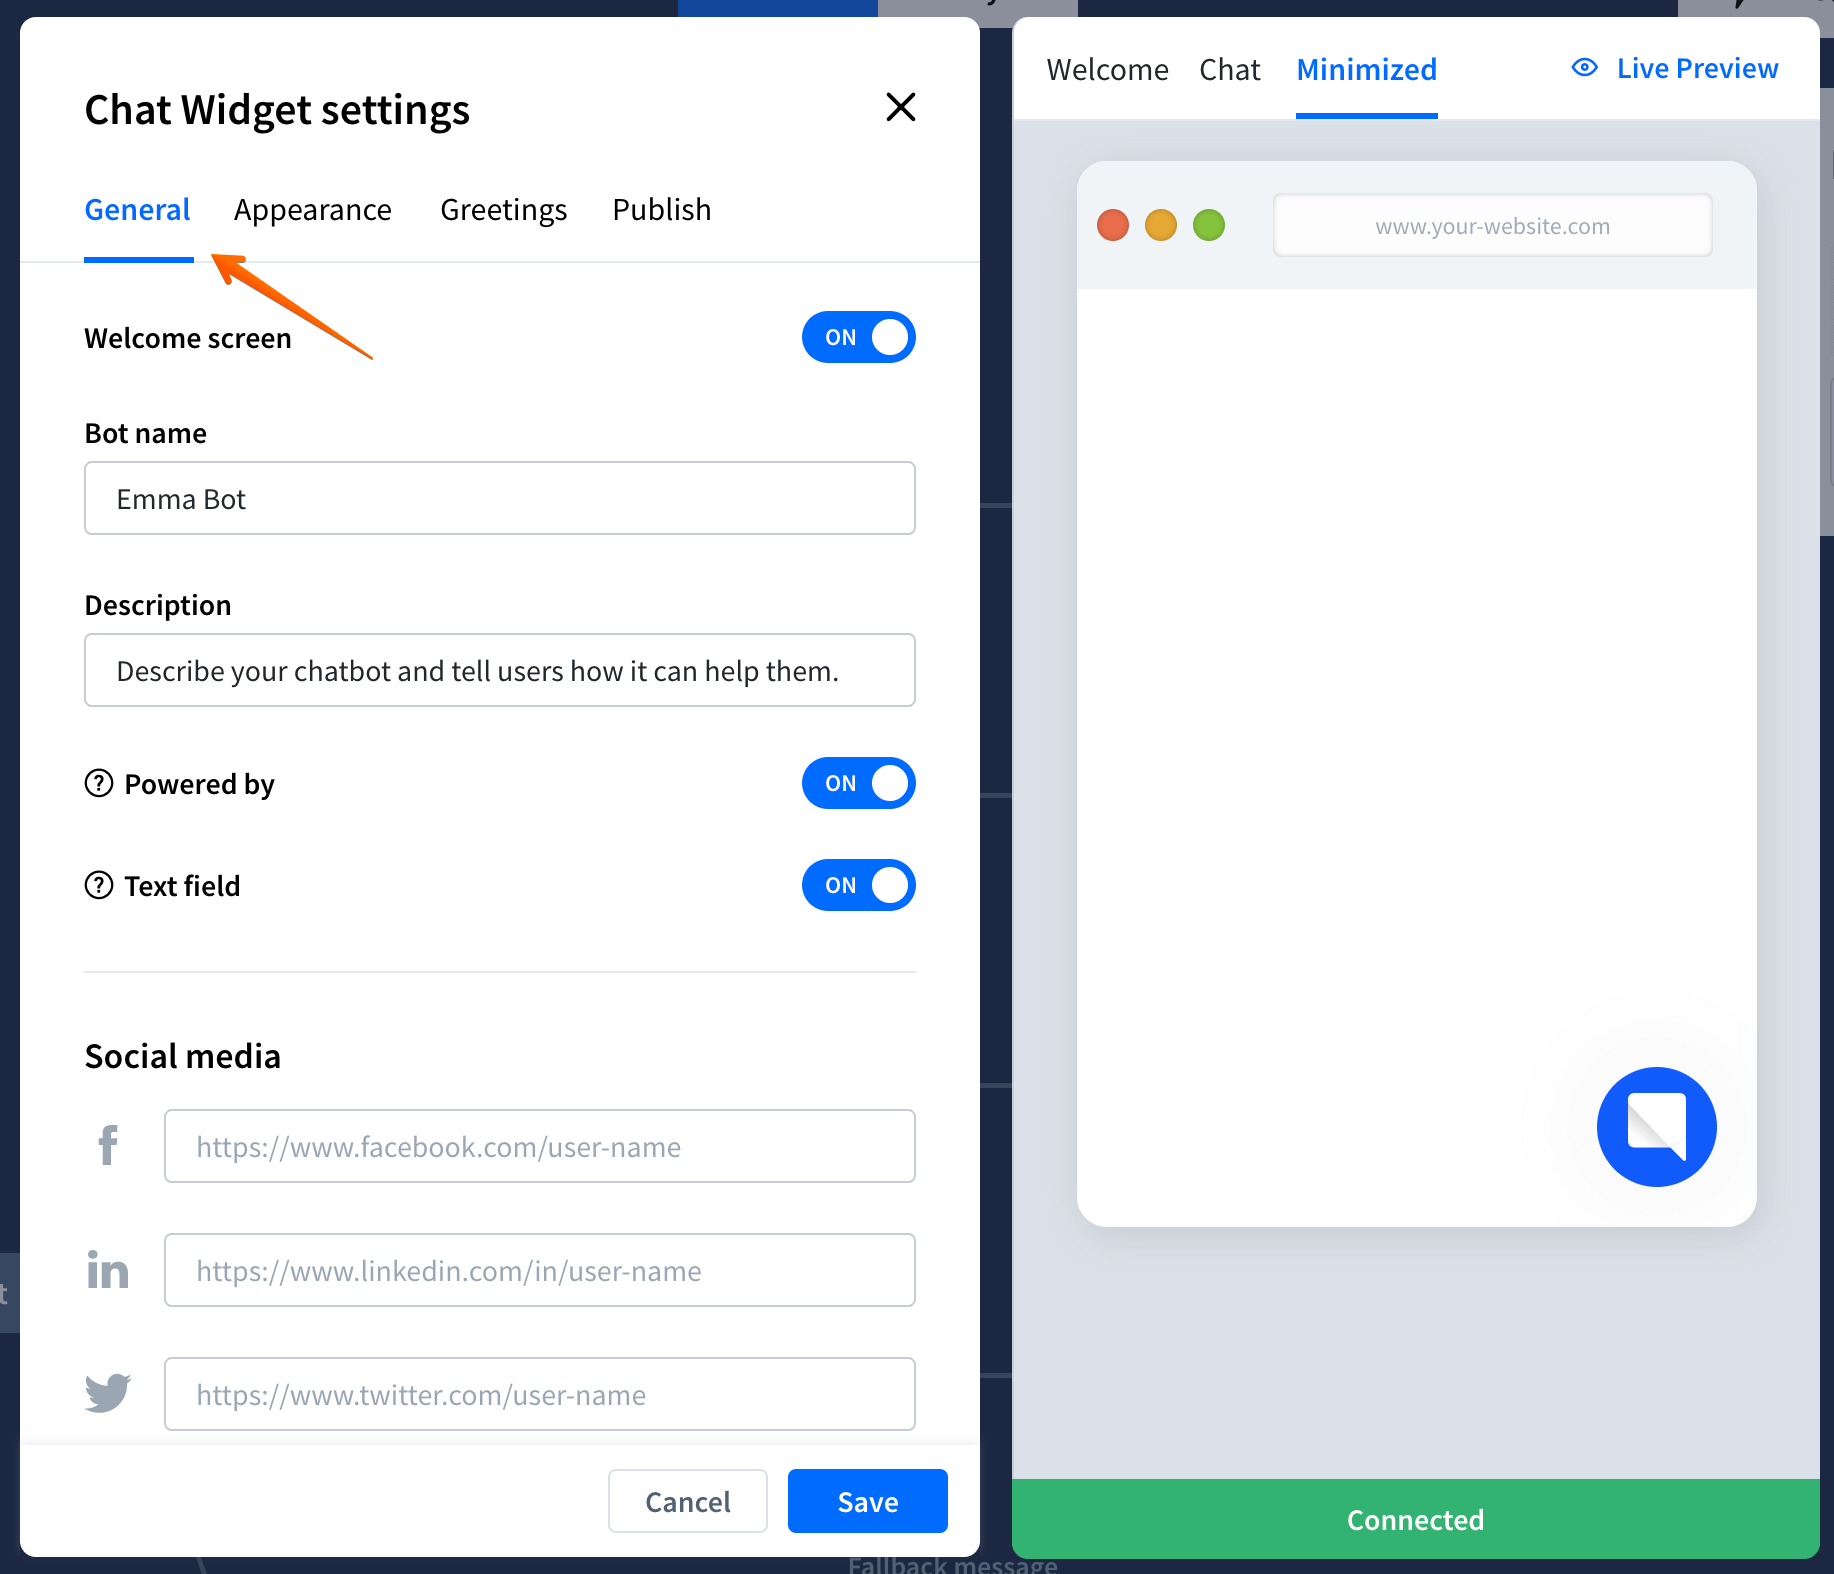 Configure the main features of your chat widget.